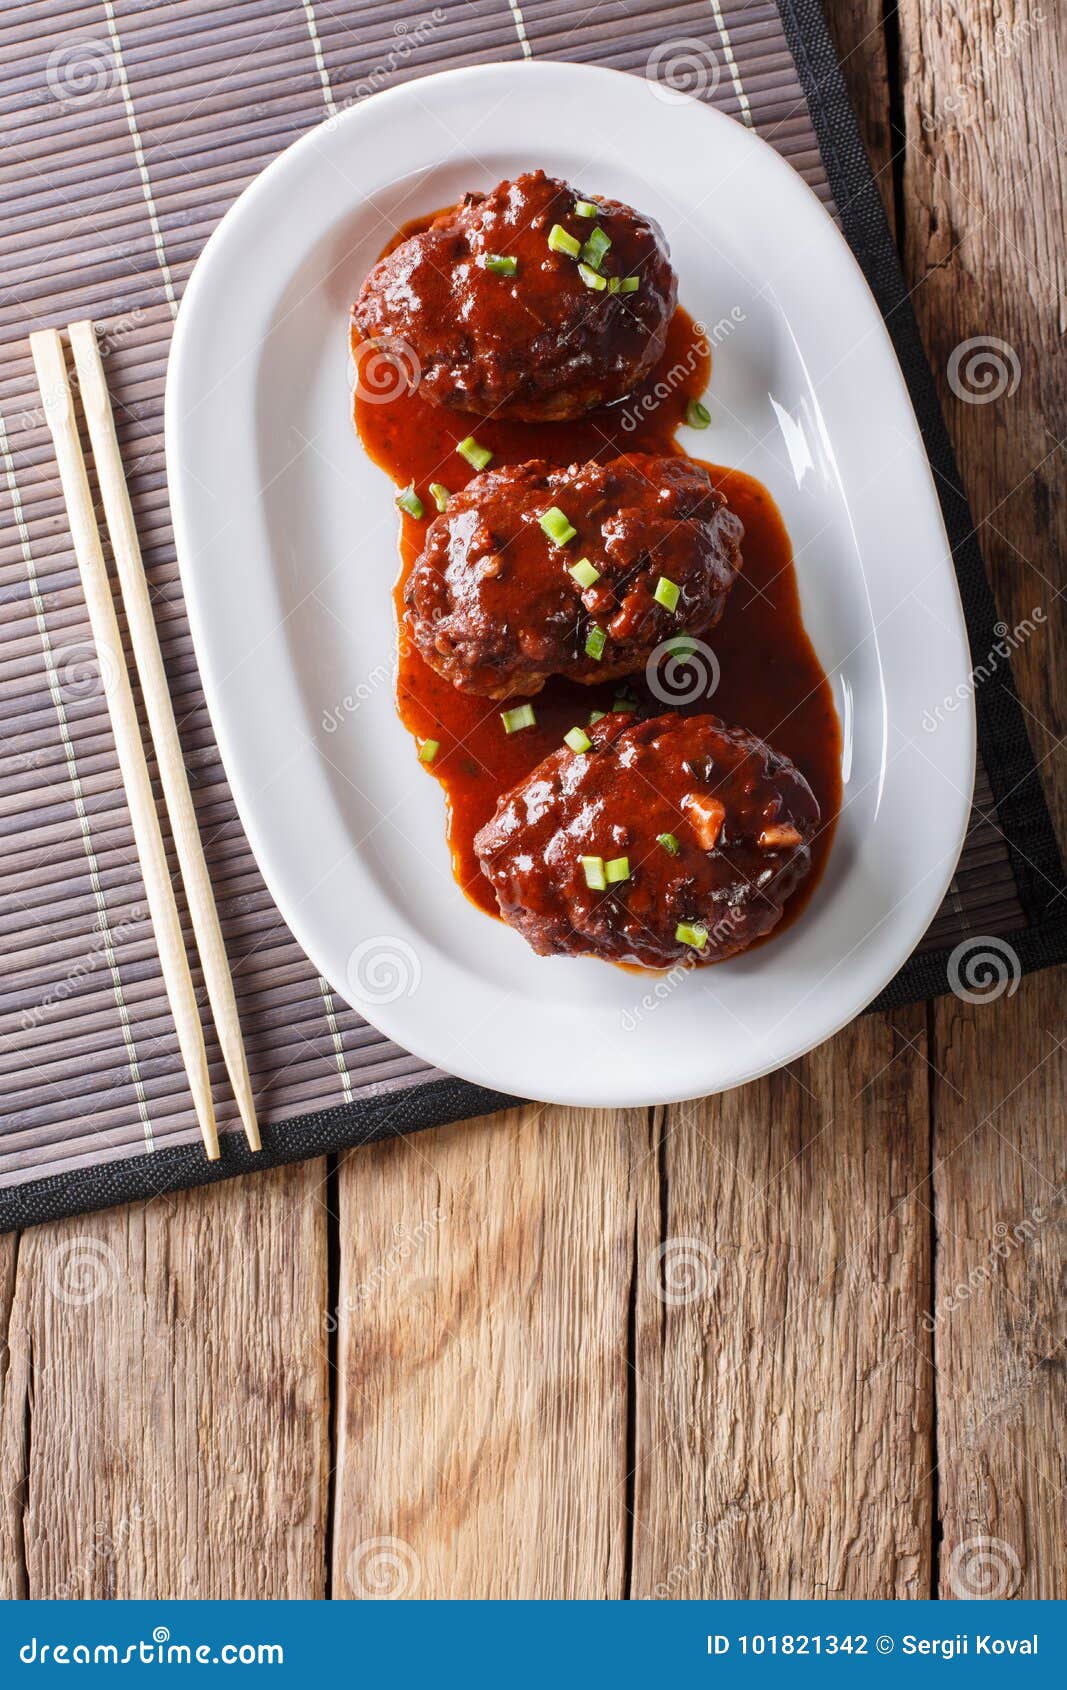 Japanese Hambagu Steak with Sauce Close-up on a White Plate. Vertical ...